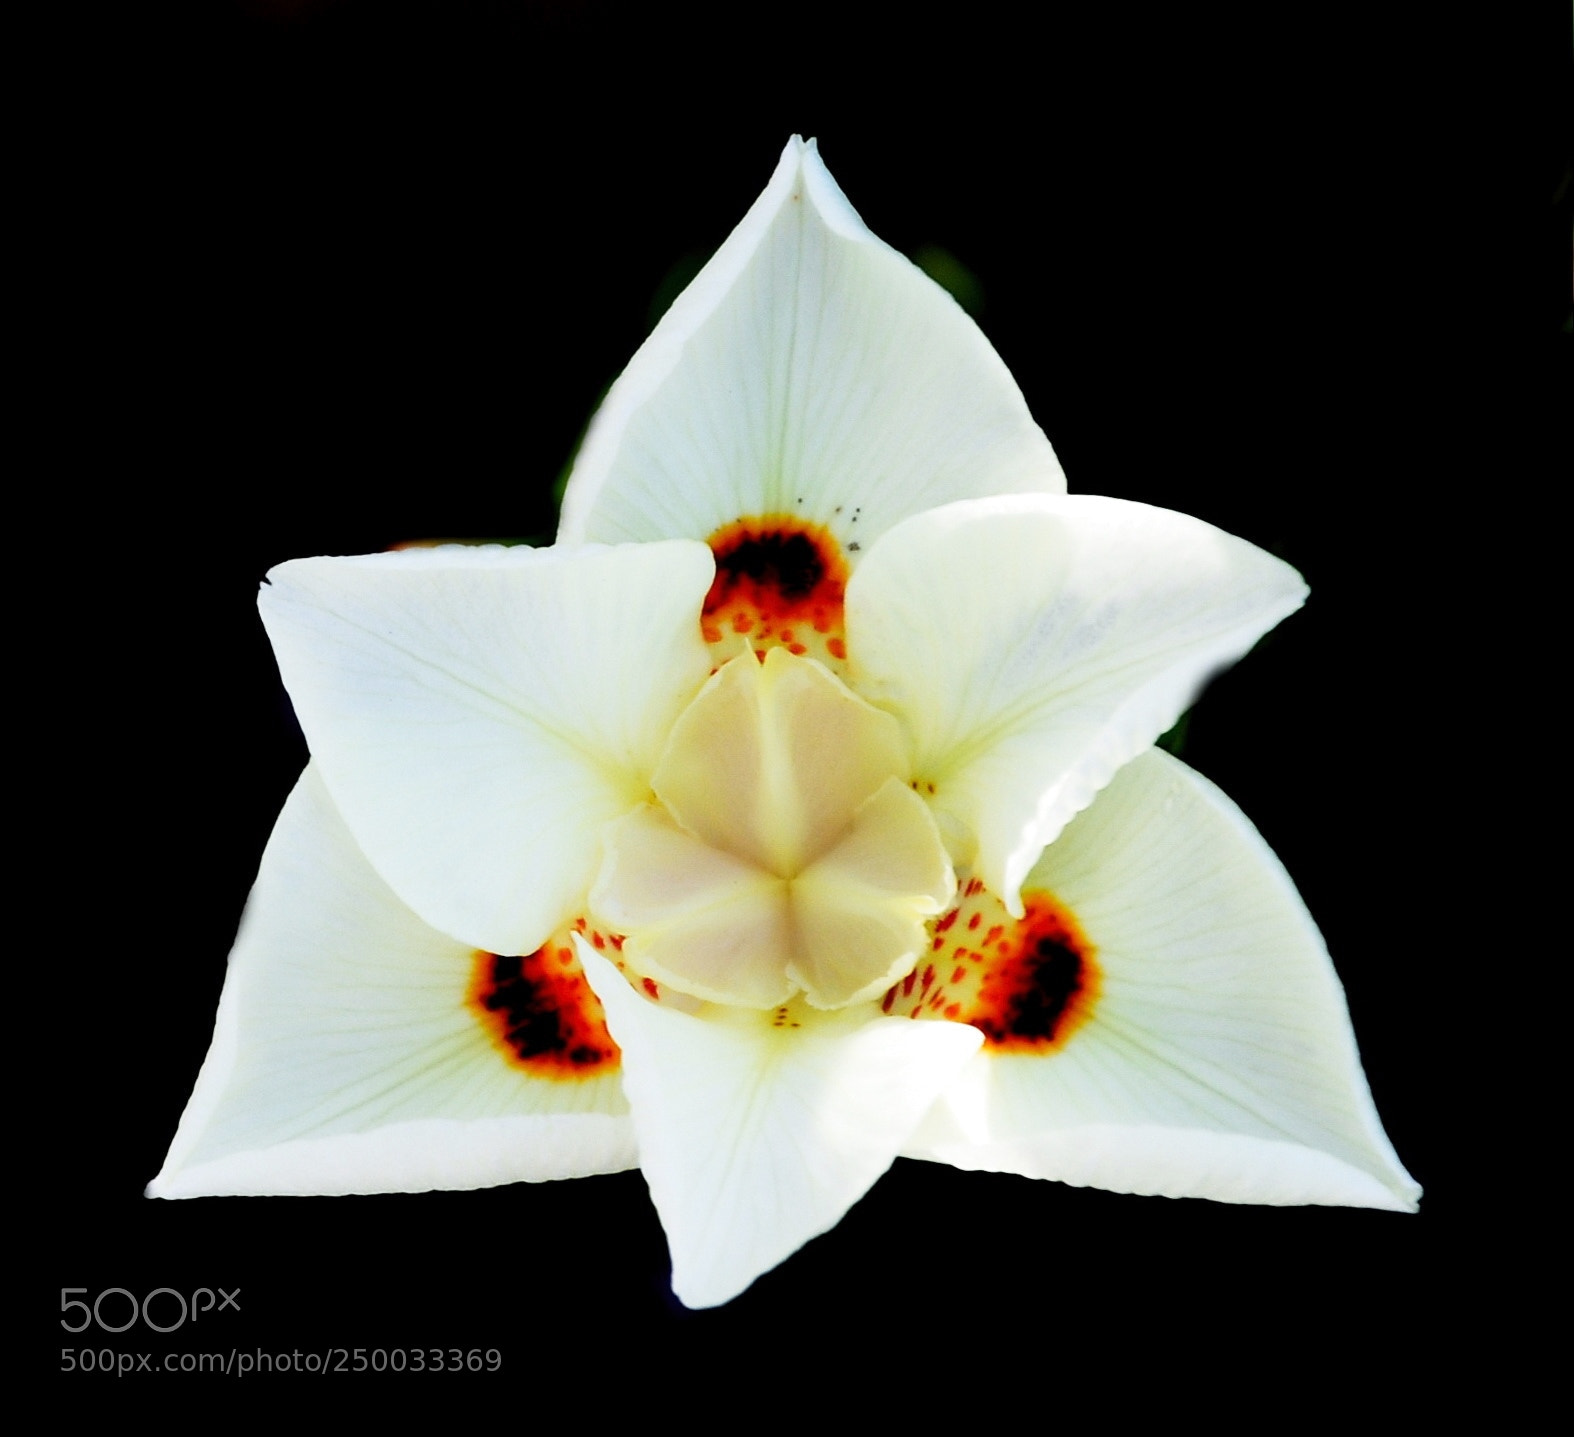 Nikon D7200 sample photo. A white spotted flower photography